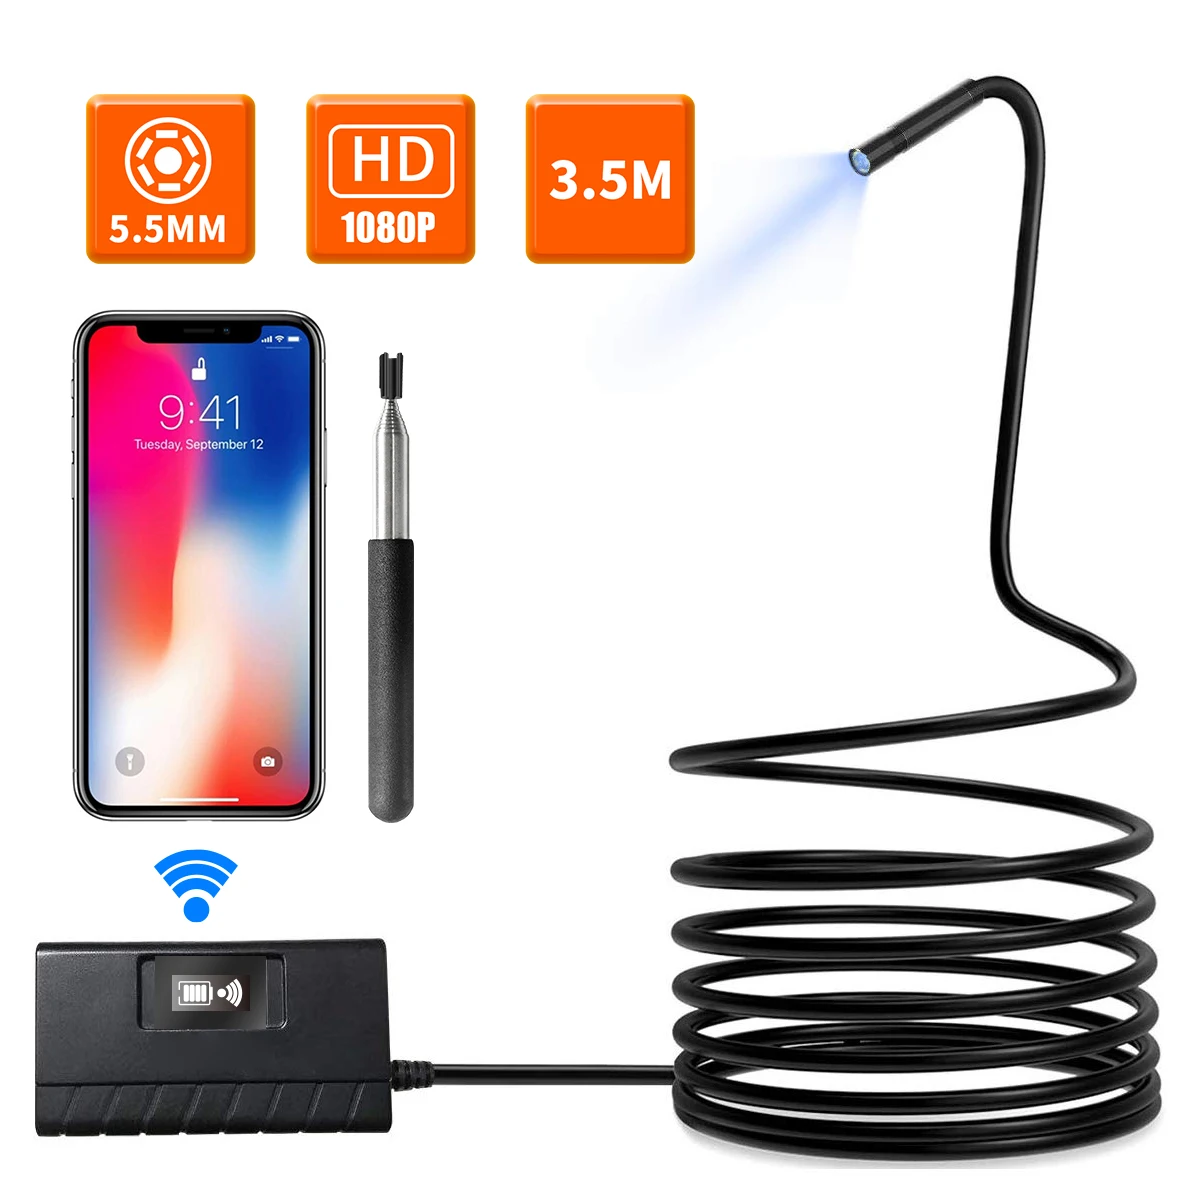 2MP 1080P 5.5MM Wireless WIFI Endoscope Inspection Otoscope Camera CMOS Borescope For Android&ISO Smart Phone Digital Microscope 3in1 usb 5 5mm endoscope camera cmos borescope inspection otoscope camera for android and computer digital microscope